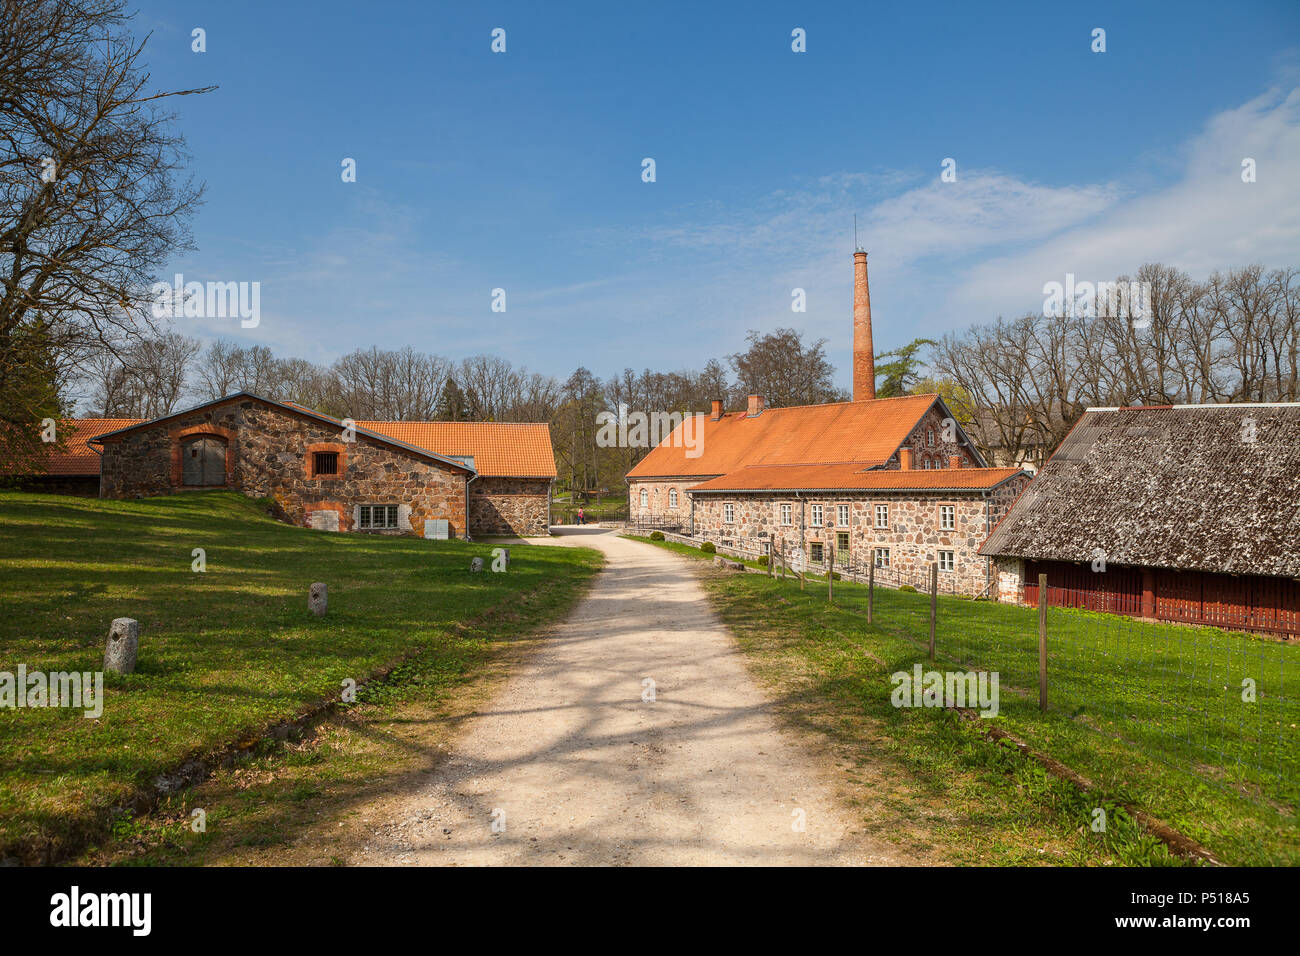 Old Olustvere manor park in the summer time. The manor's vodka distillery buildings located in the middle of Estonia Stock Photo